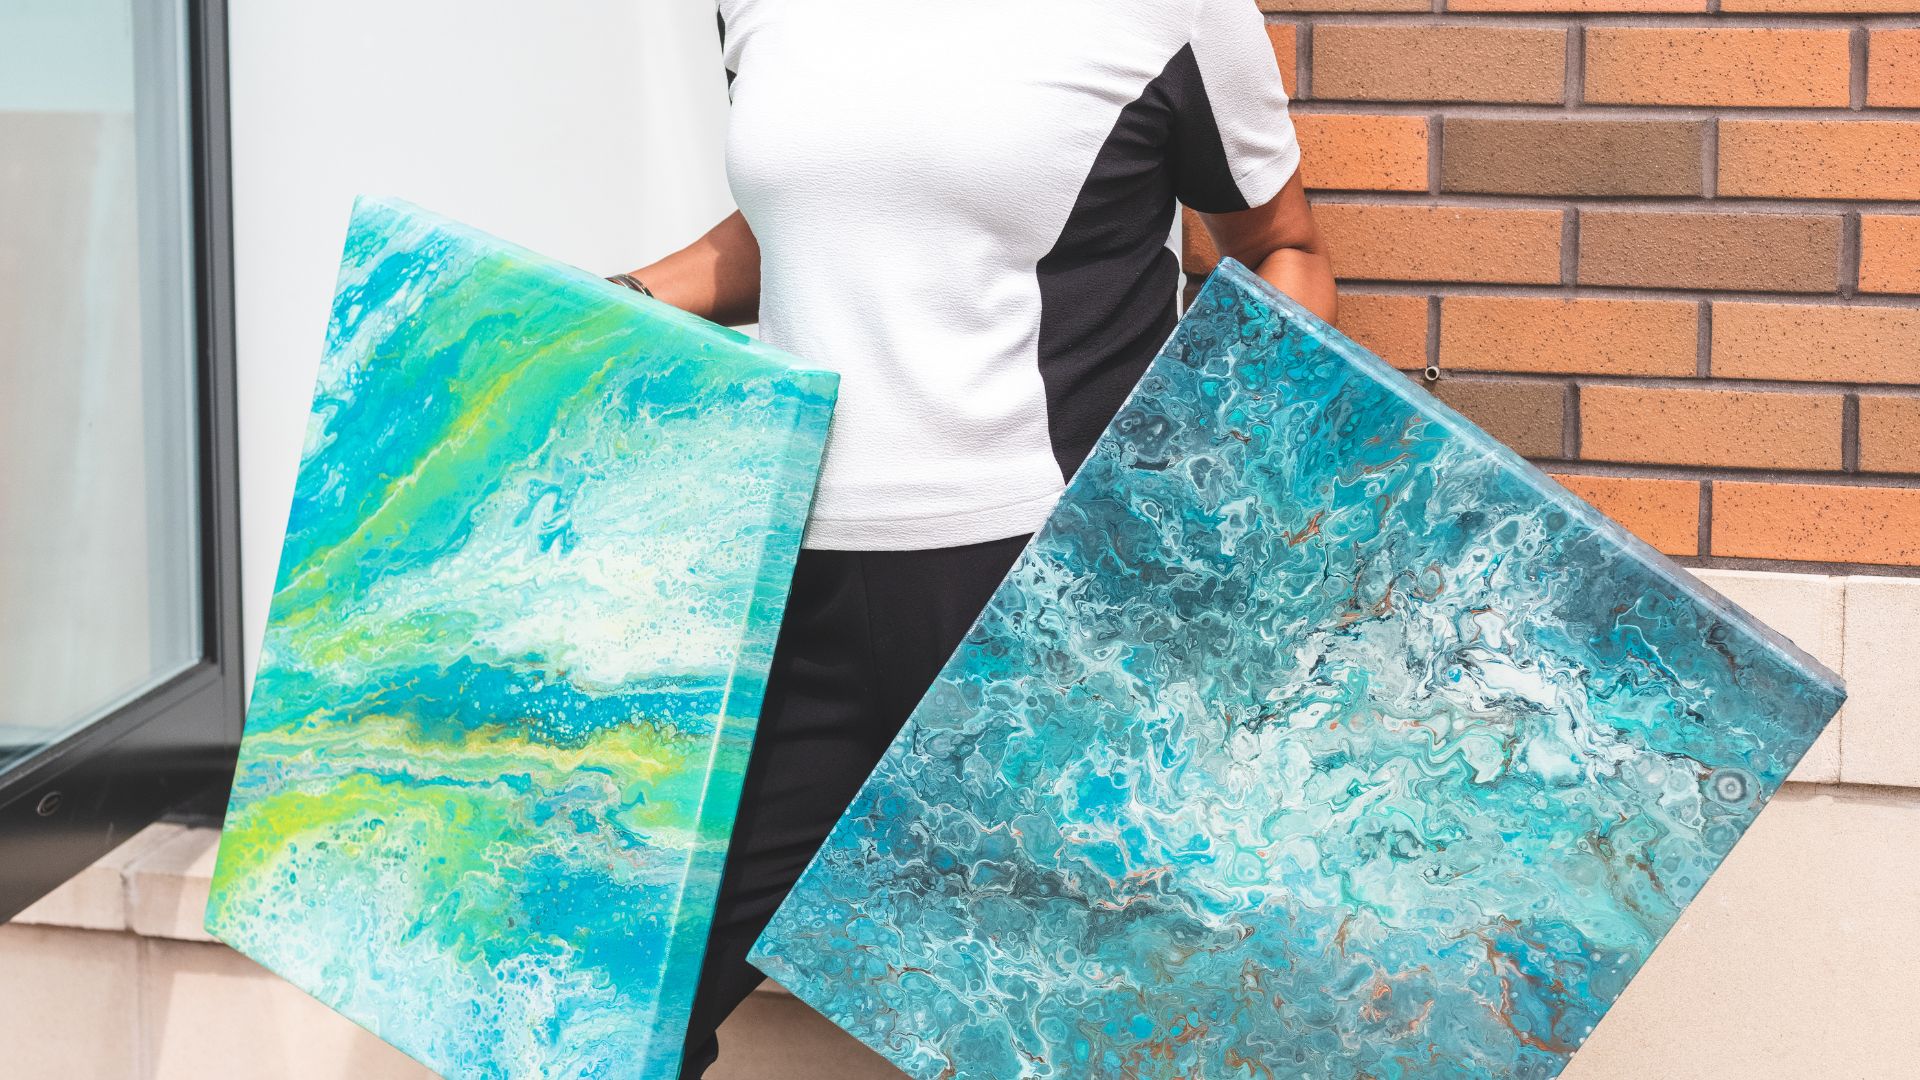 Woman Holds Two Abstract Canvas Paintings